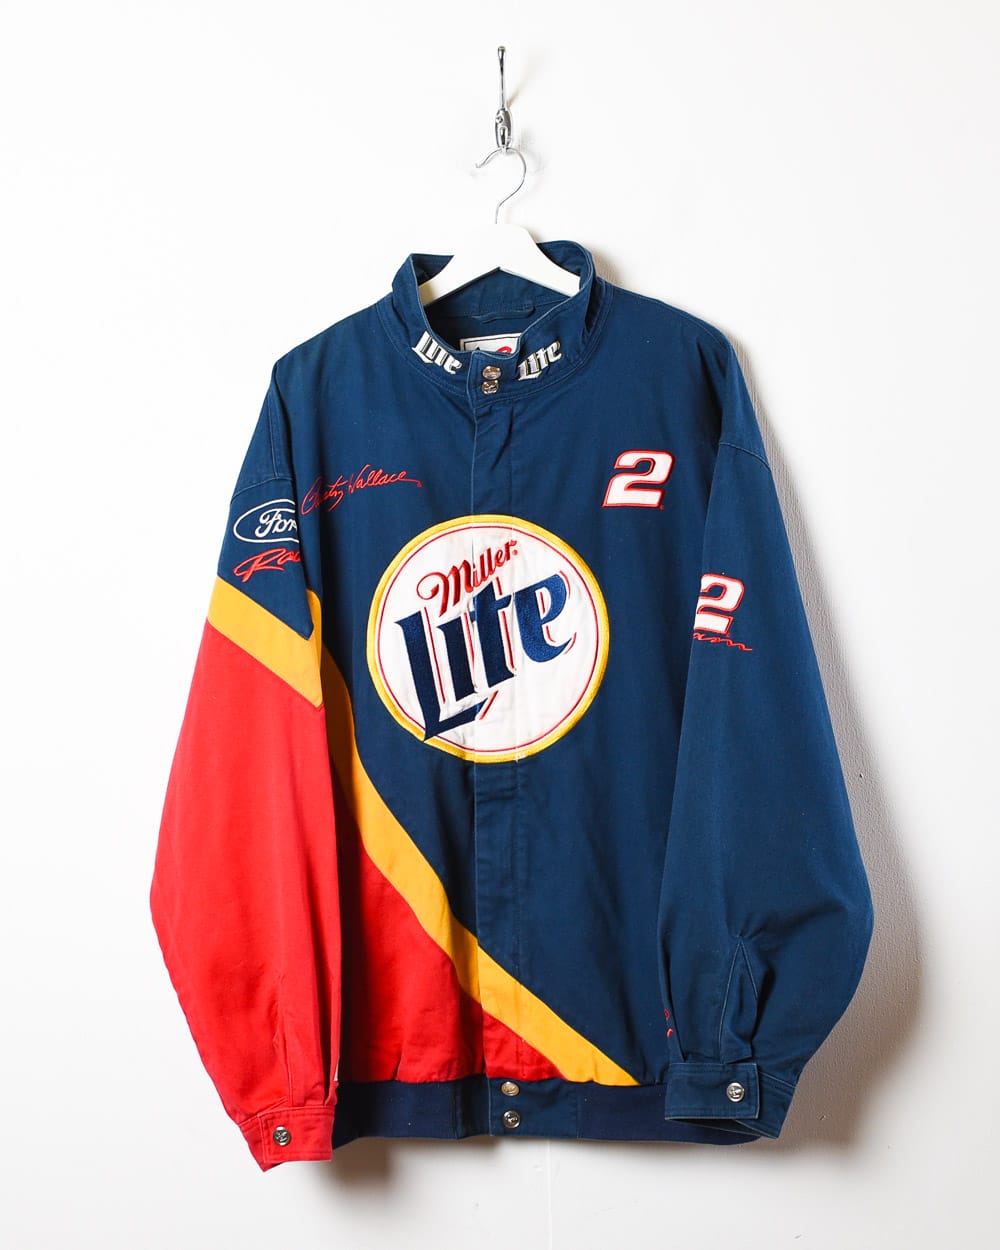 Navy Chase Authentic Nascar Miller Lite Racing Jacket - X-Large